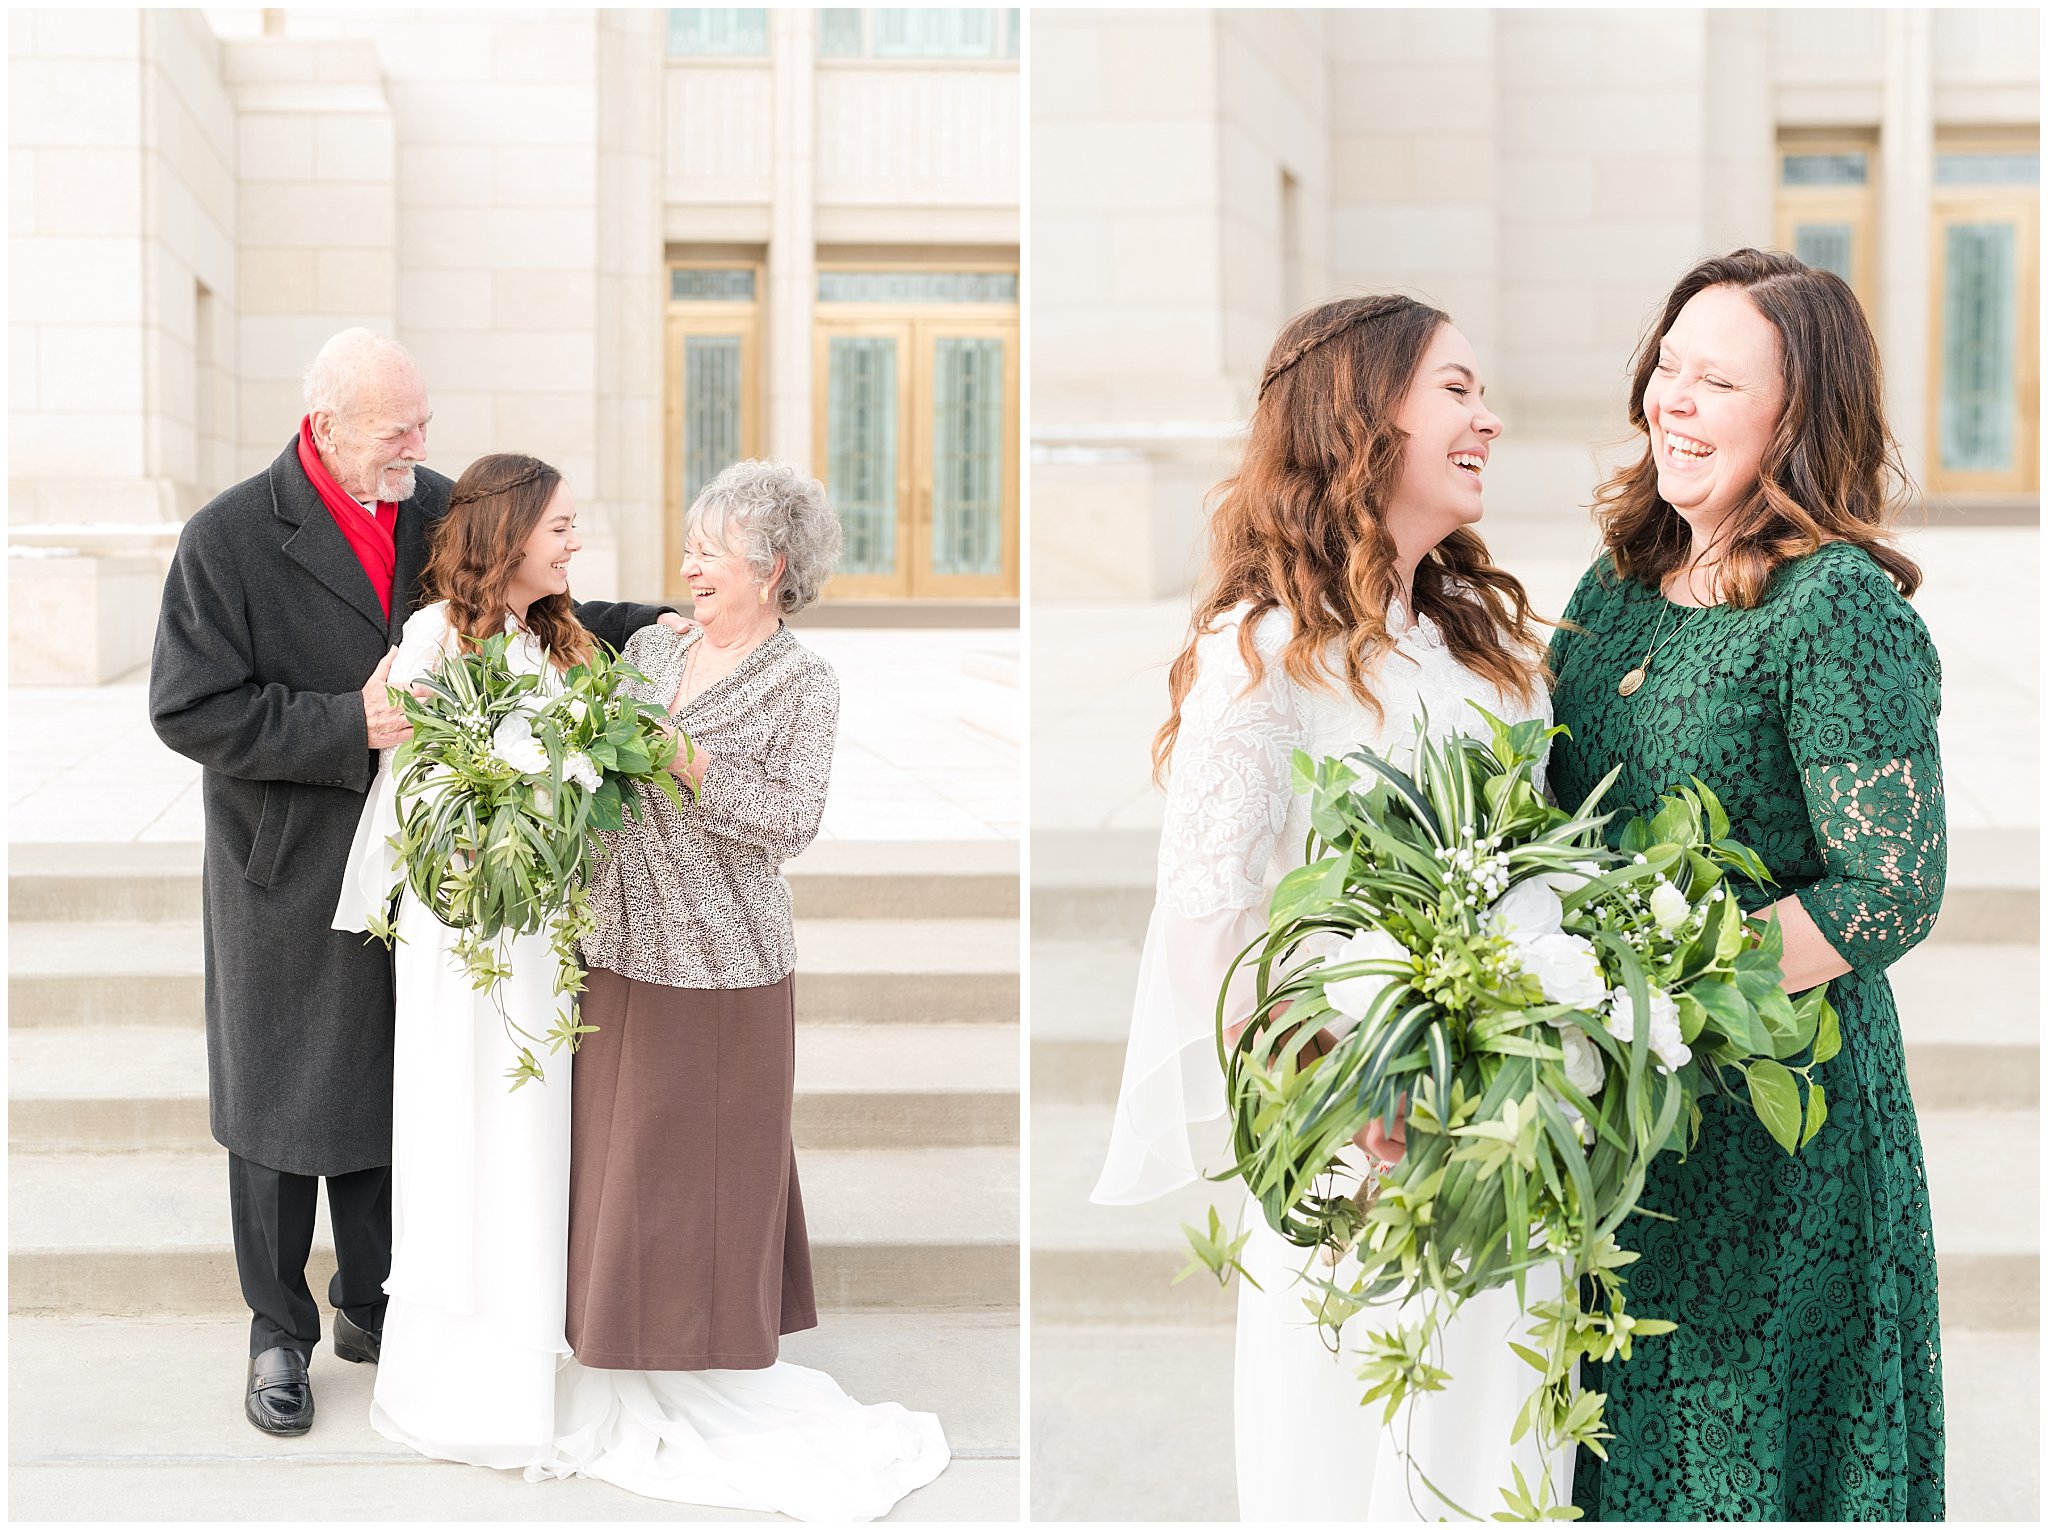 Family portraits during Ogden Temple winter wedding | Brown, Emerald Green, and white wedding | Ogden Temple and Sweet Magnolia Wedding | Jessie and Dallin Photography